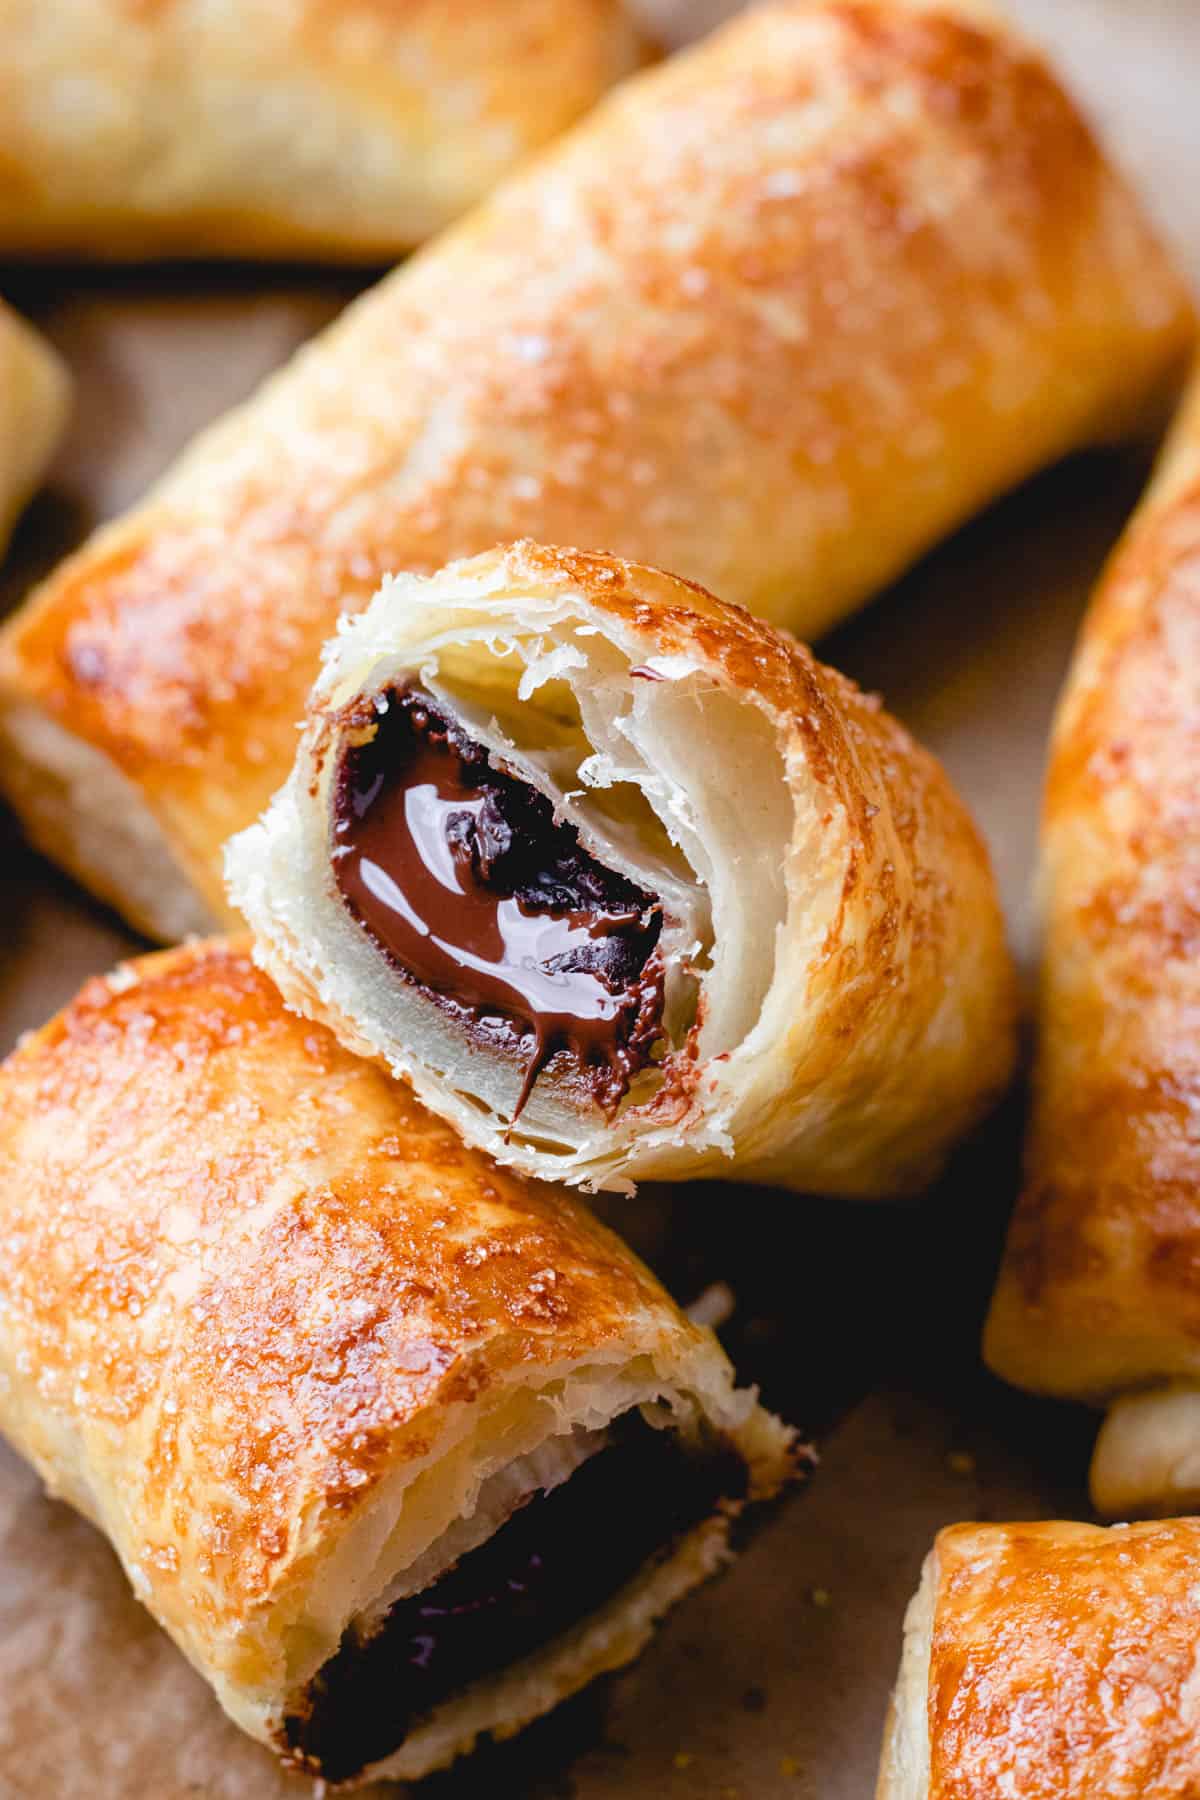 Folded puff pastry with melted chocolate.